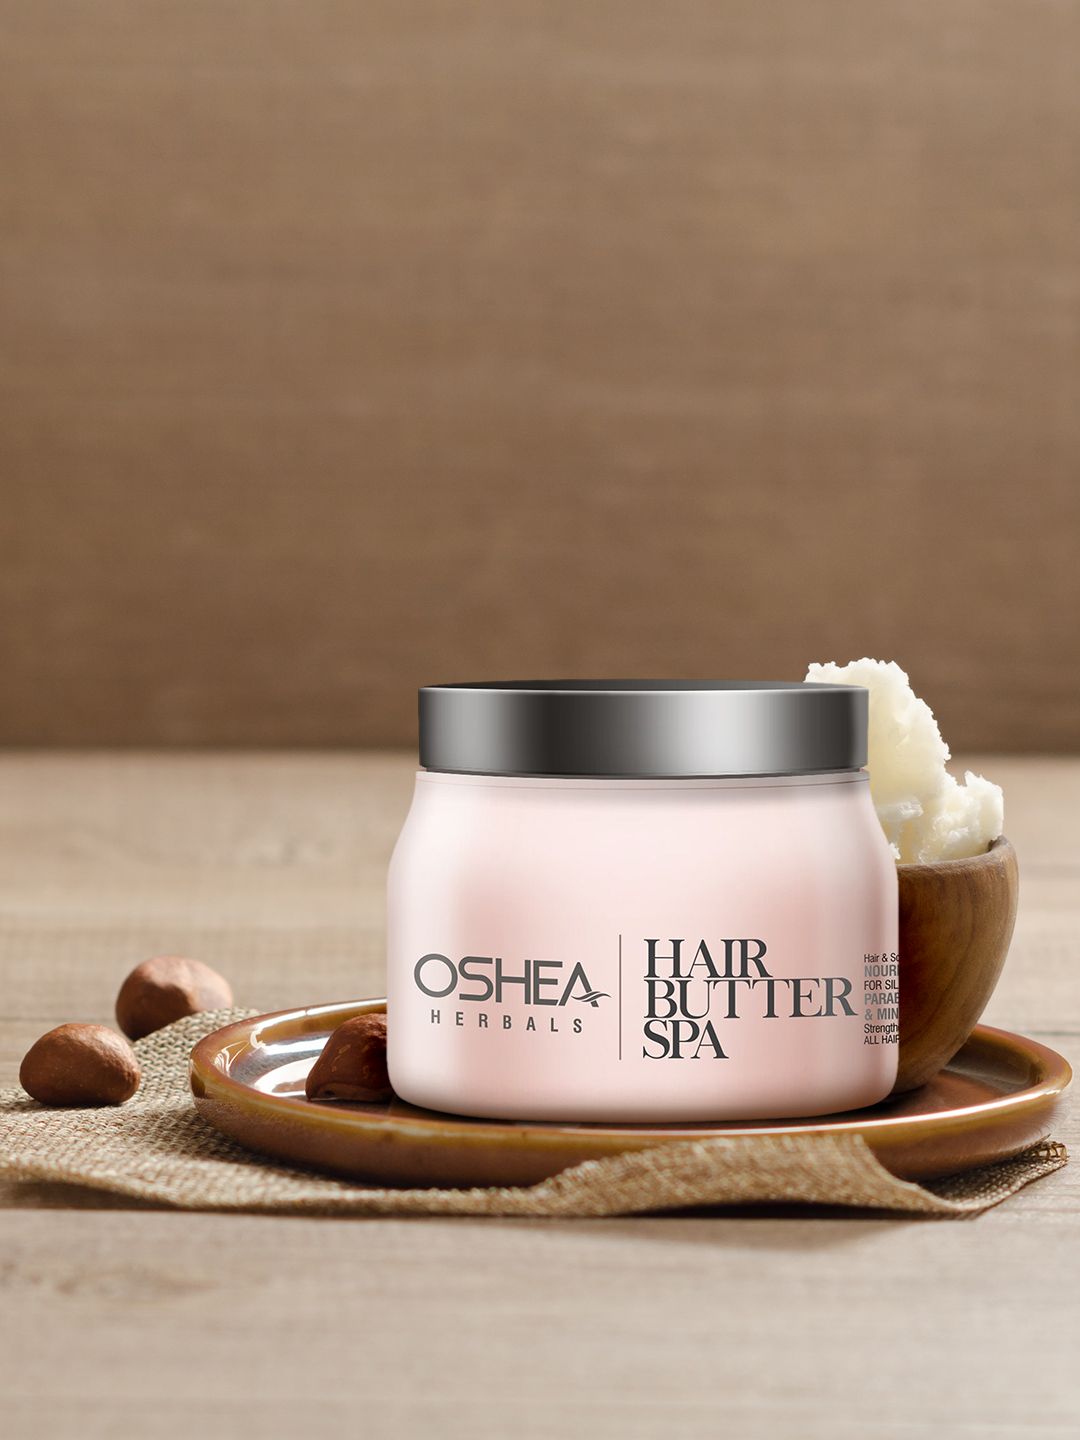 Oshea Herbals SPA Hair Butter Price in India